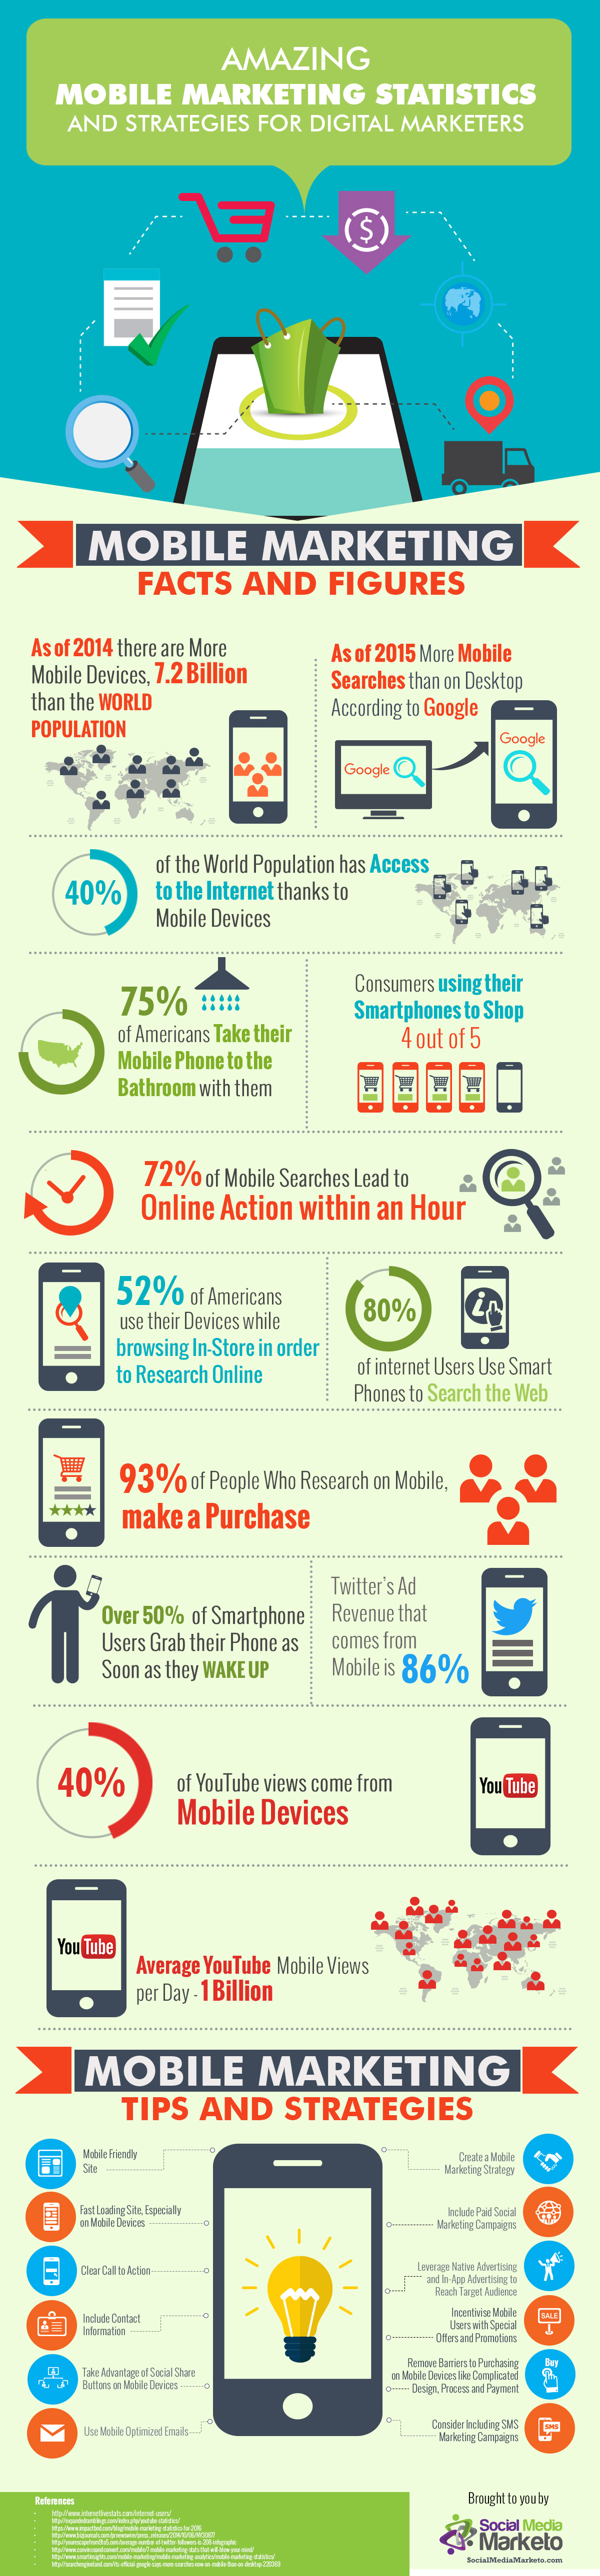 Mobile-Marketing-Strategy-Infographic